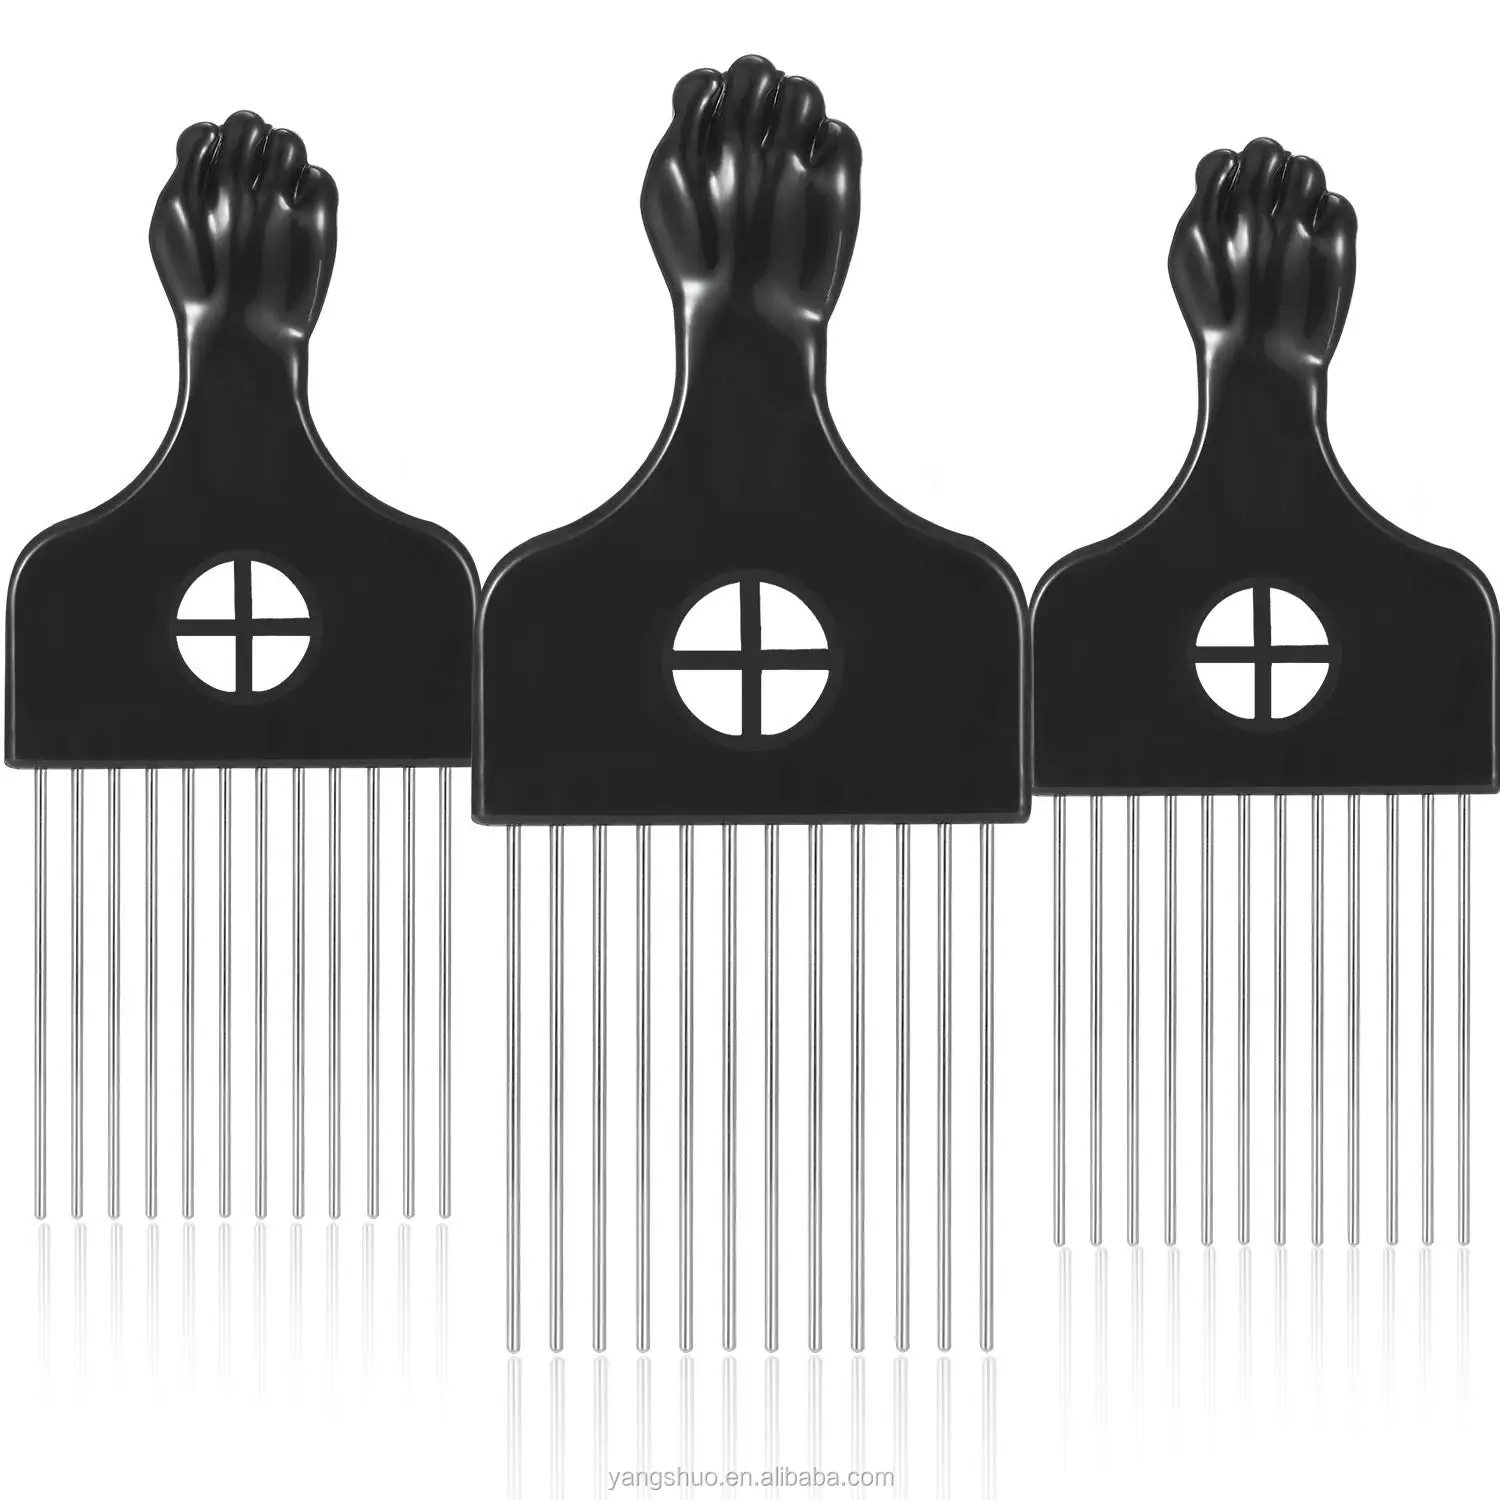 

Afro Comb Metal Pick Comb Afro Braid Pick Hairdressing Detangle Wig Braid Hair Styling Comb Styling Tool, Black